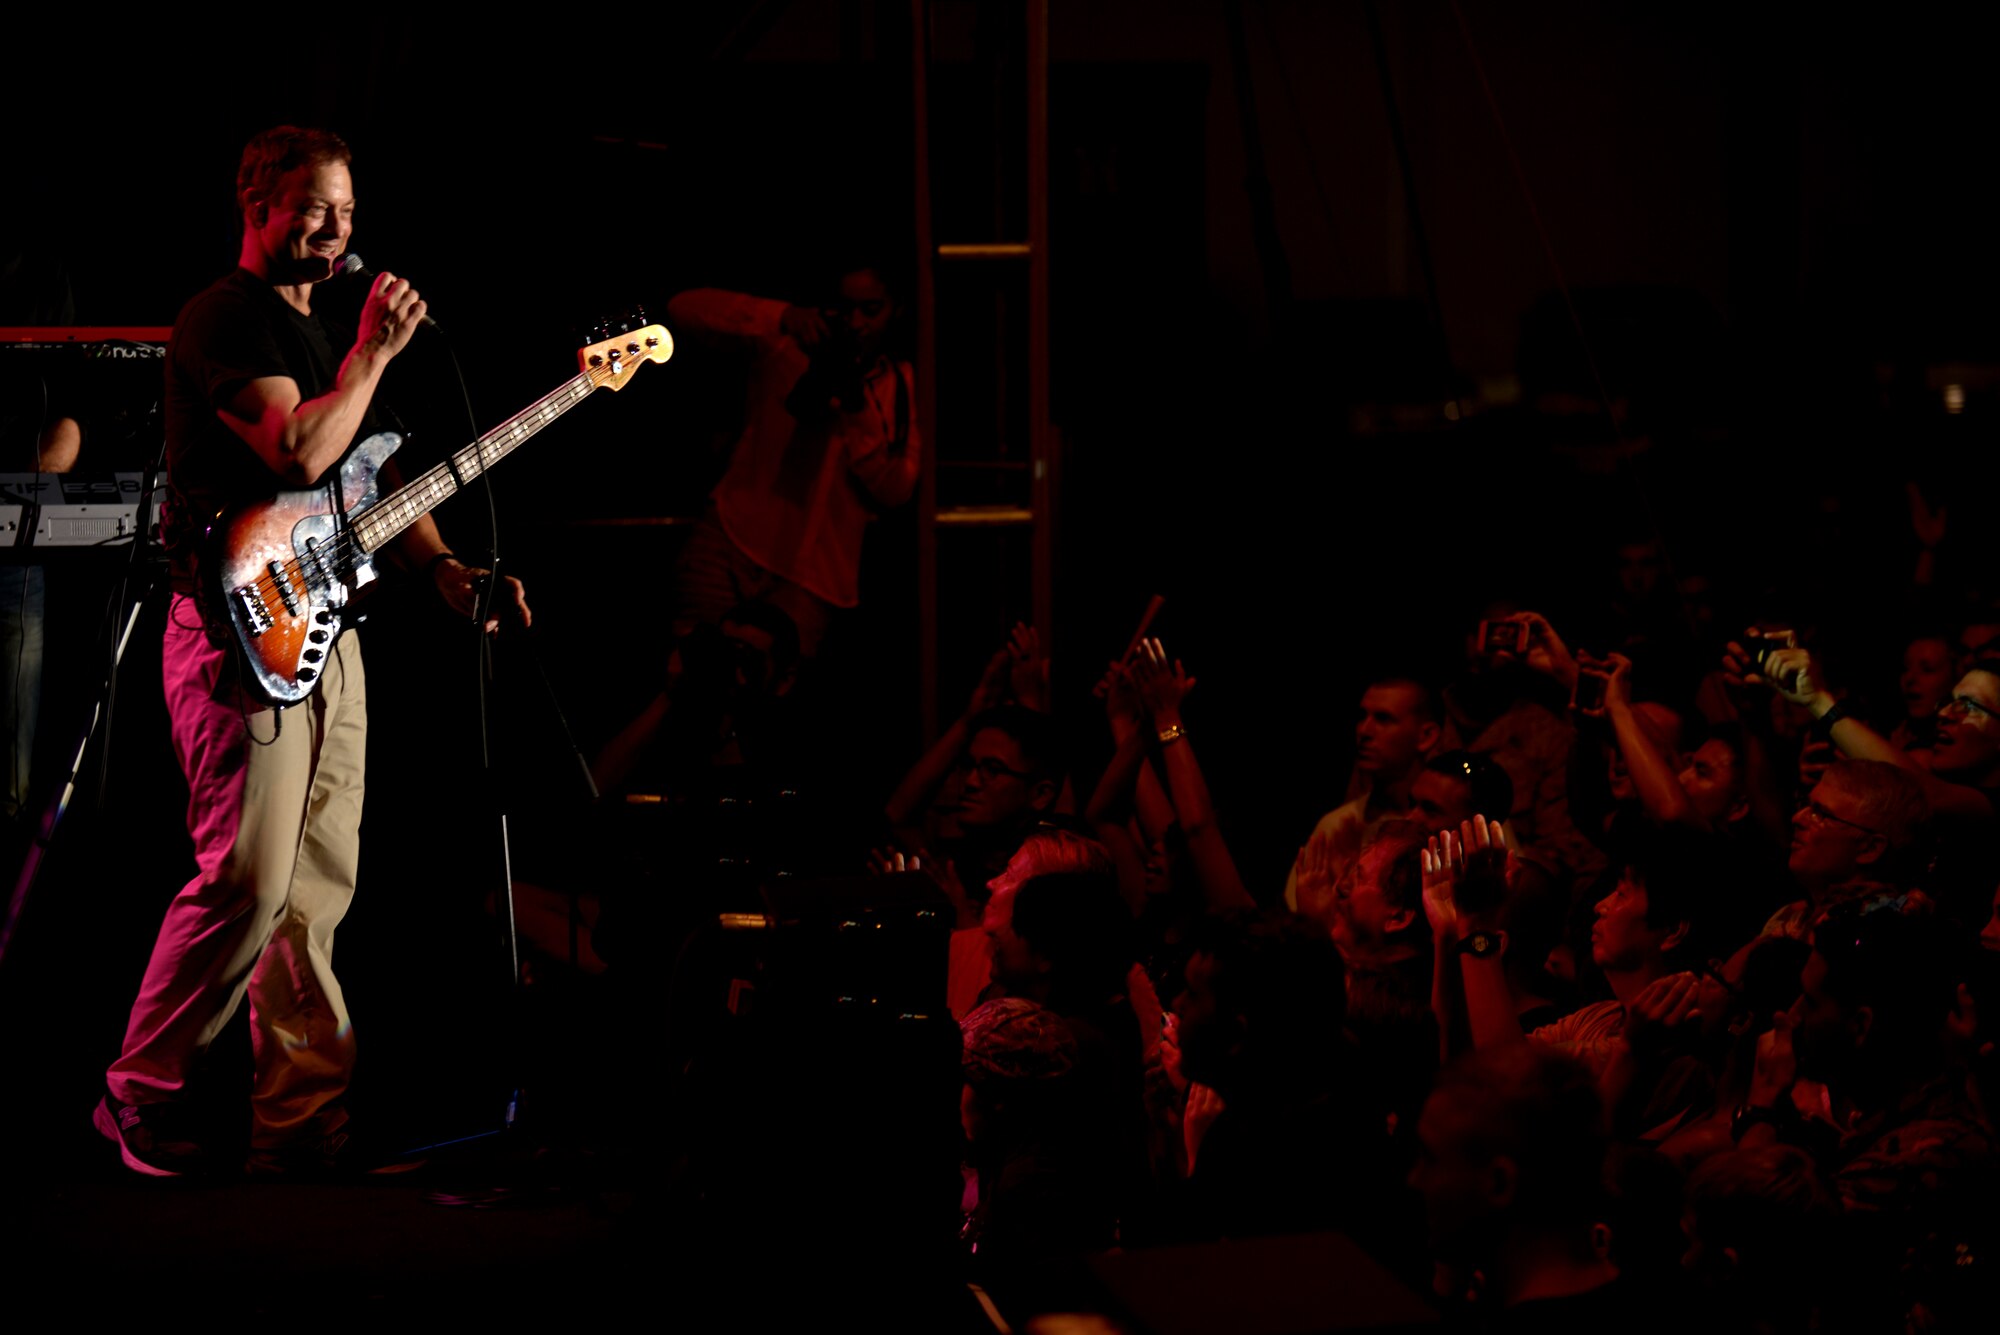 Gary Sinise, actor and bass player for the Lt. Dan Band, talks to the audience during a performance at U.S. Marine Corps Air Station Futenma, Japan, July 6, 2013. This performance was the last in the group's Pacific USO tour. (U.S. Air Force photo by Tech. Sgt. Jocelyn Rich-Pendracki/Released)